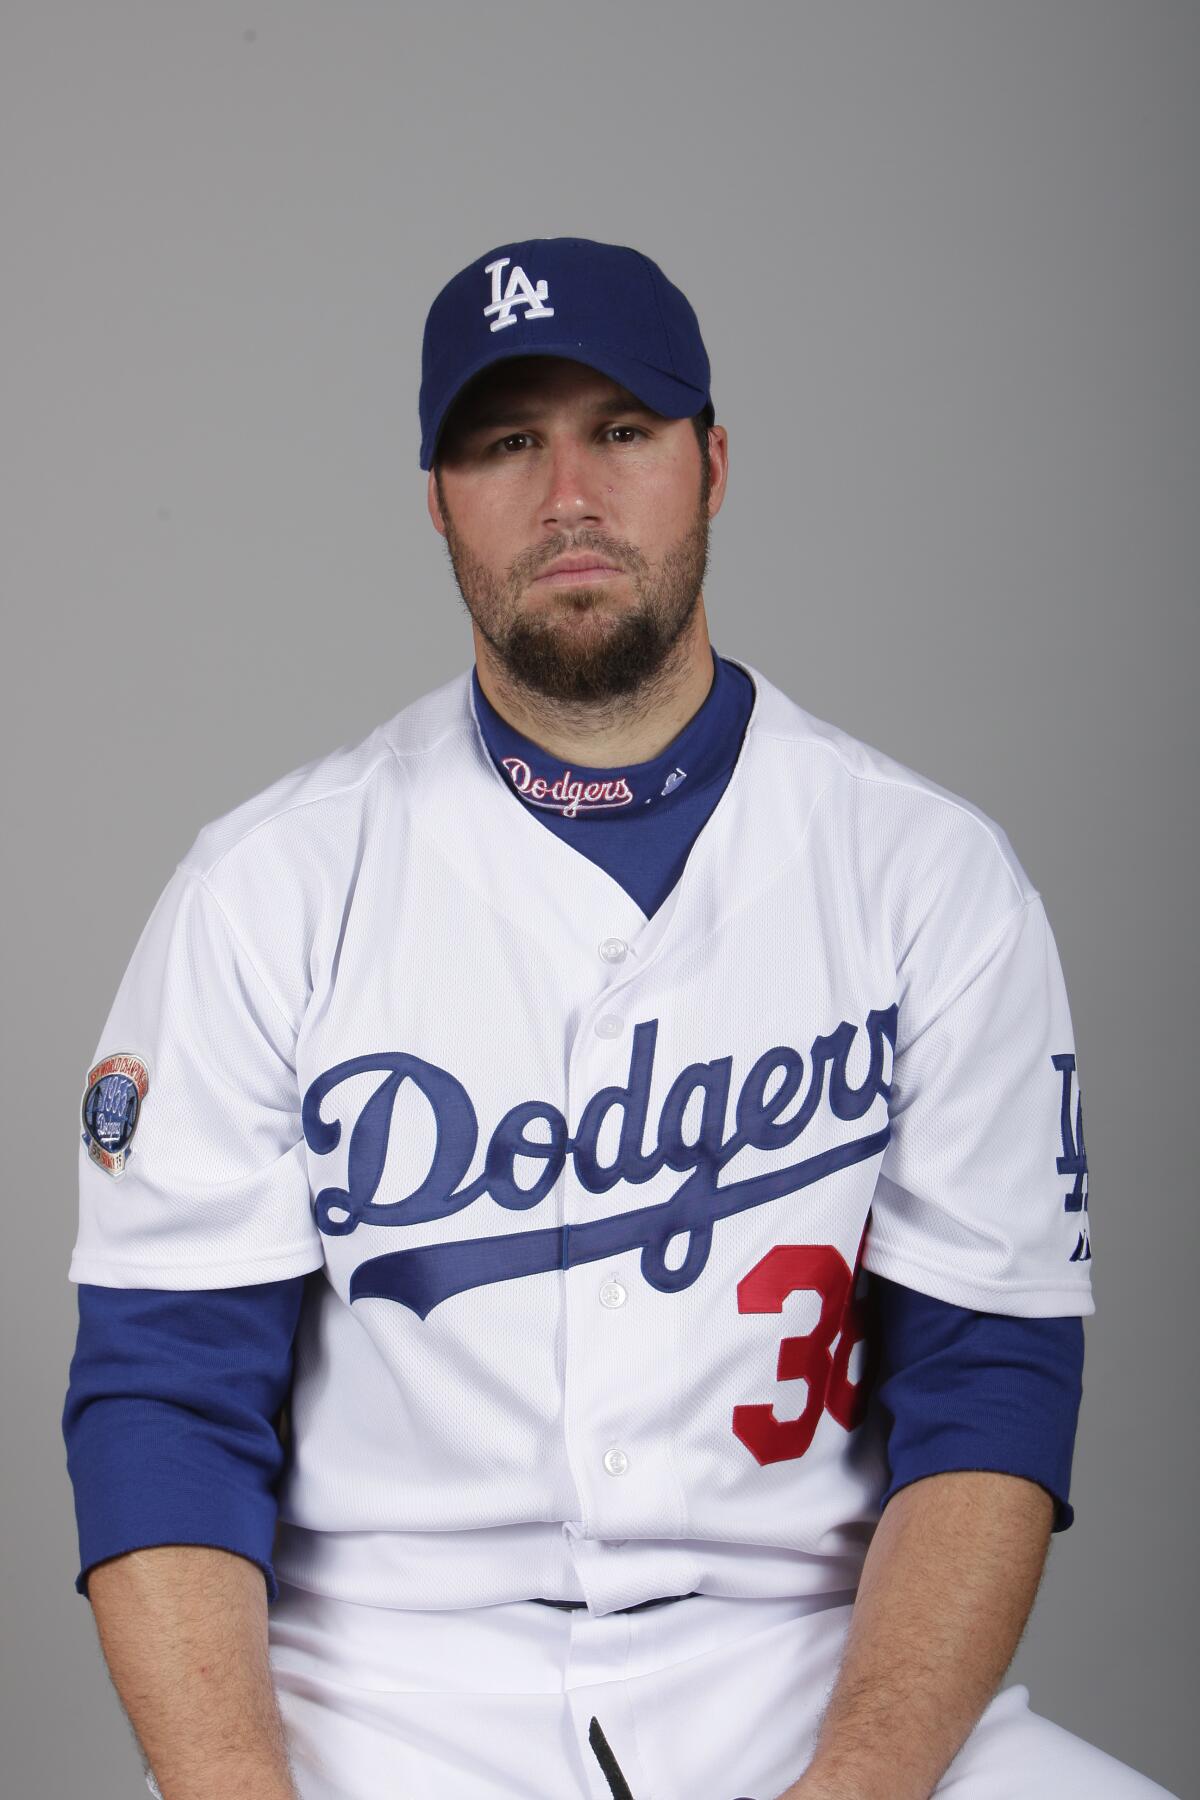 eric gagne game over